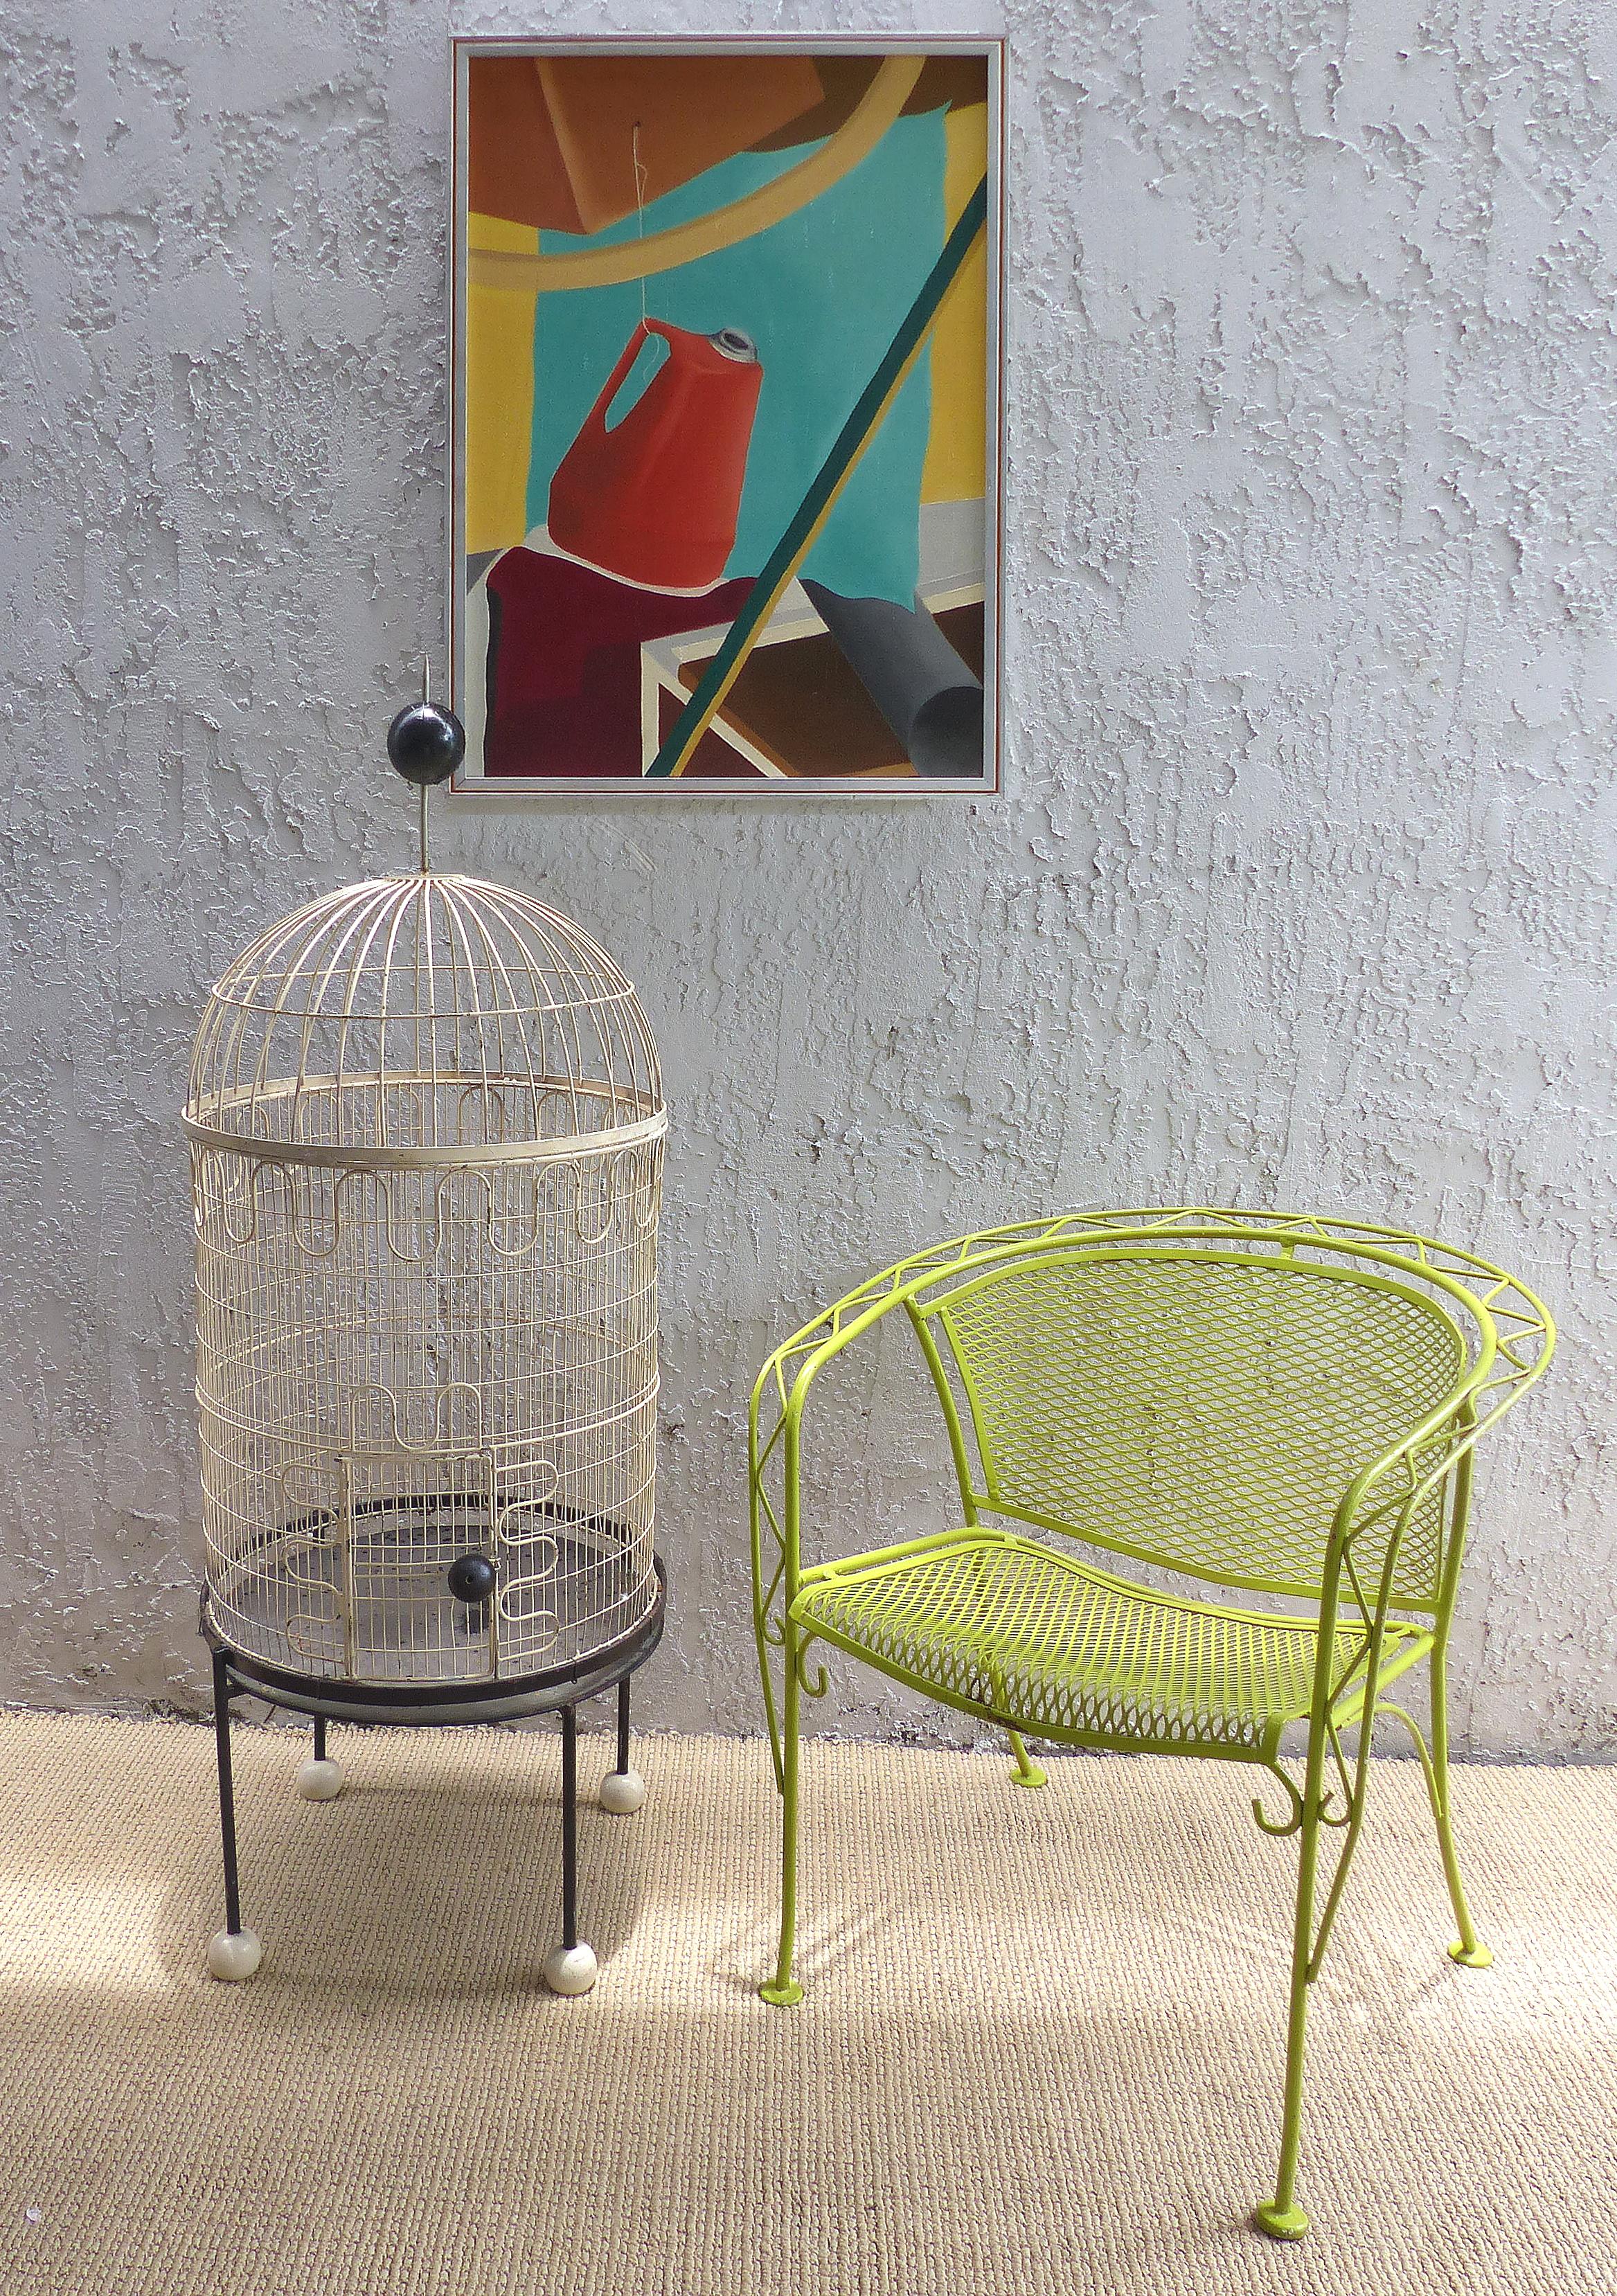 Offered for sale is a sculptural circa 1955 Mid-Century Modern decorative birdcage by Frederick Weinberg. The cage was created in wrought iron and wood with whimsical lines representative of the era. The iron repetitive curves used by Weinberg are